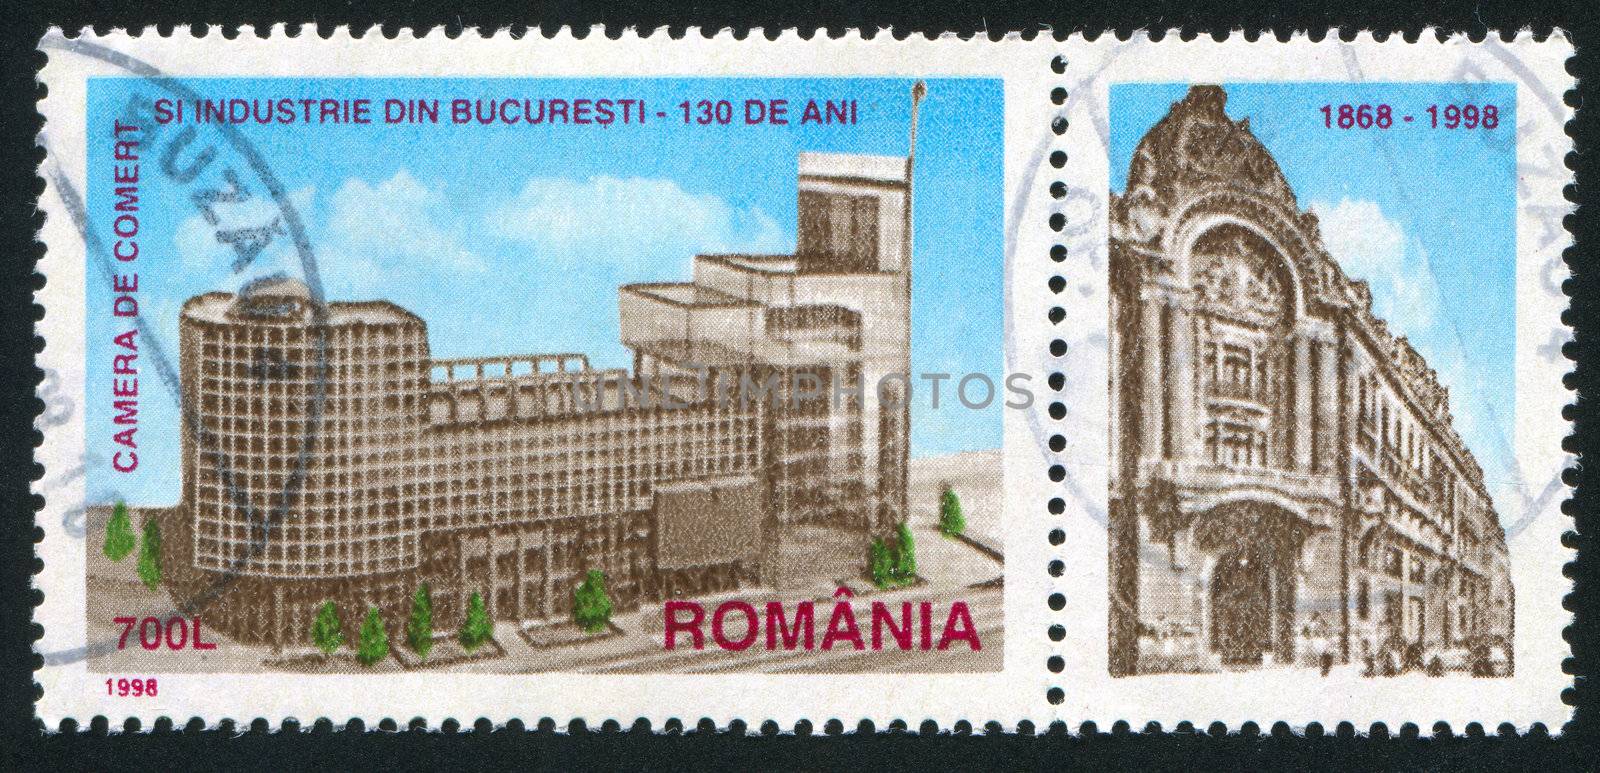 ROMANIA - CIRCA 1998: stamp printed by Romania, shows Chamber of Commerce and Industry, circa 1998